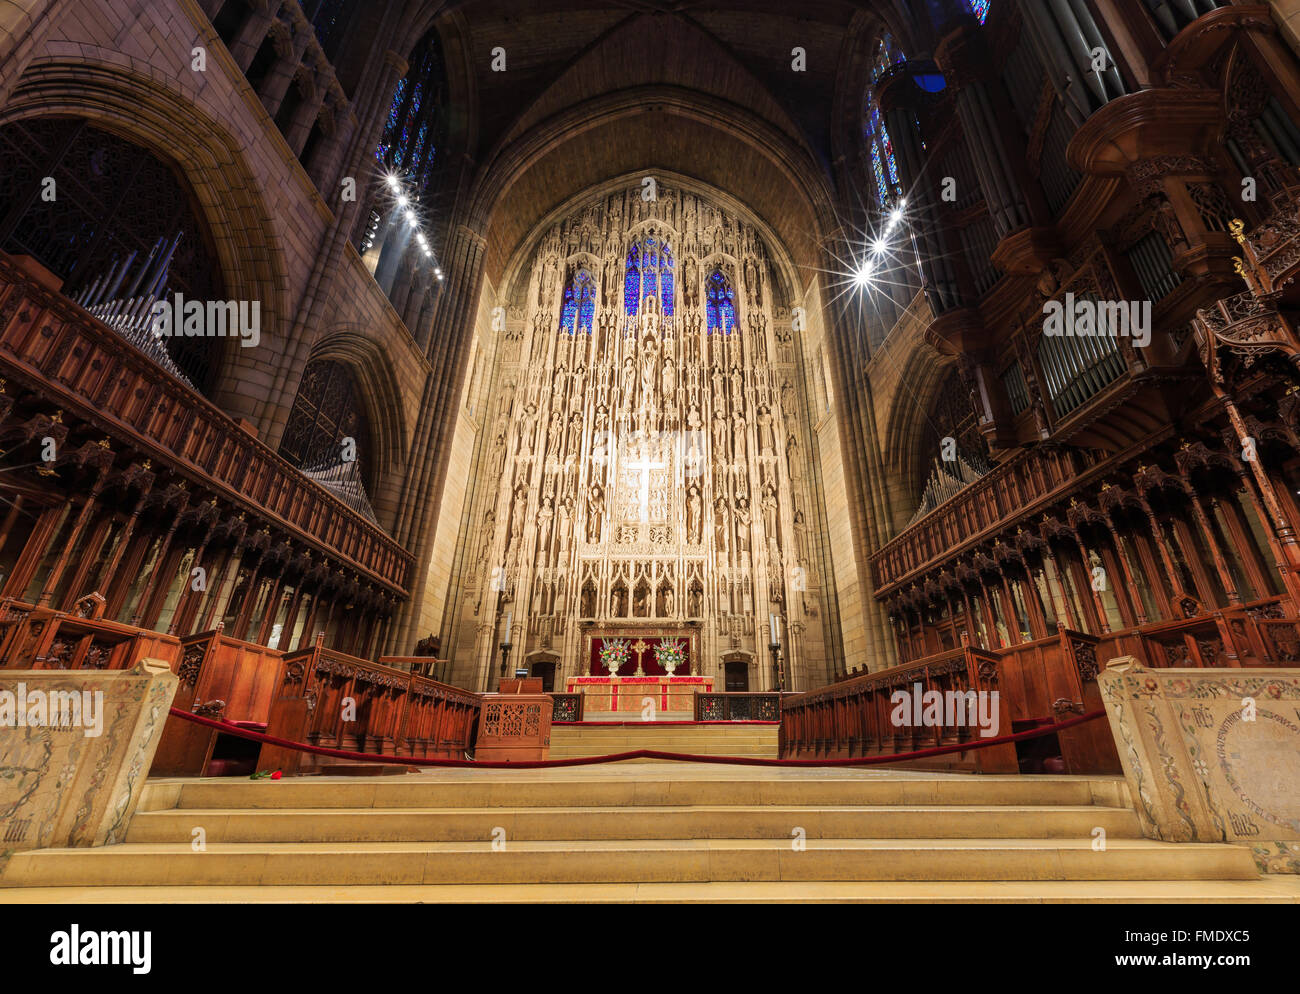 NEW YORK CITY, SEP 15: St. Patrick's Cathedral on SEP 15, 2014 at New York City. Stock Photo